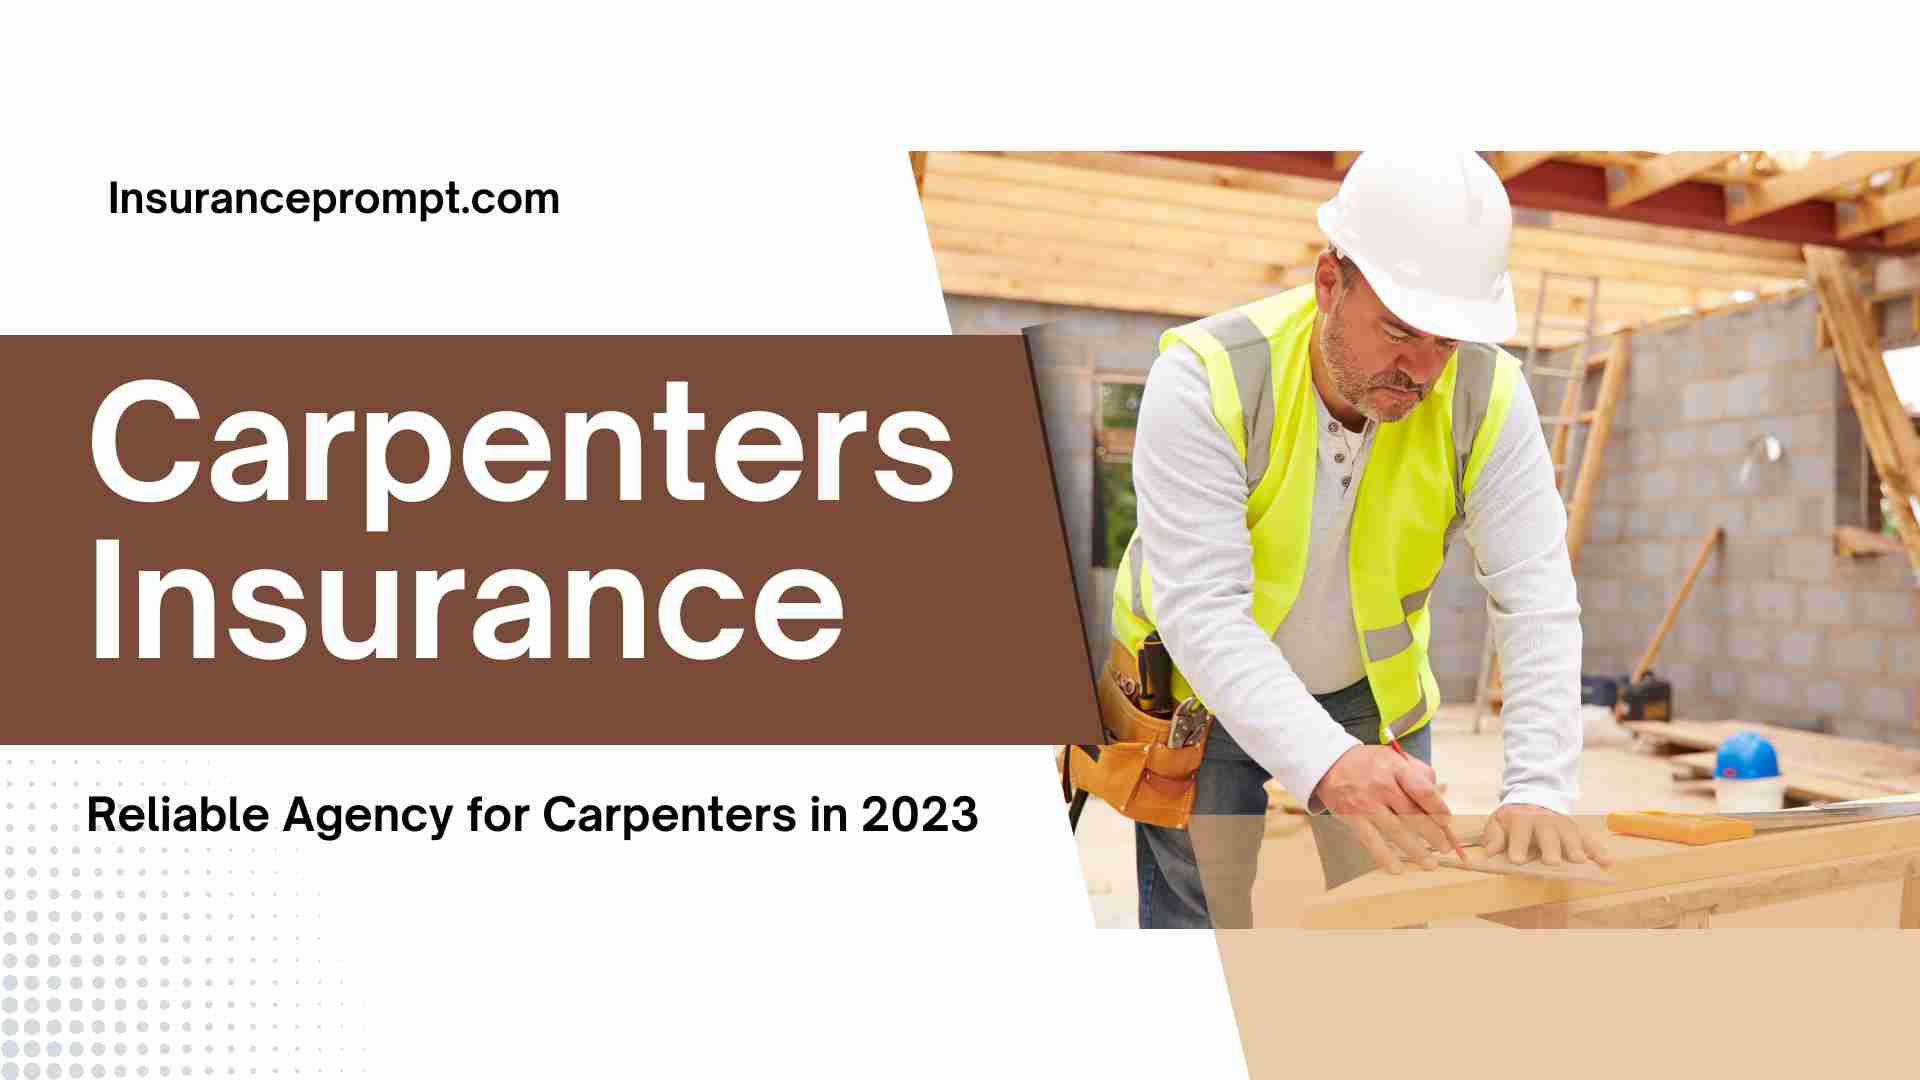 Carpenters Insurance Reliable Agency for Carpenters in 2023